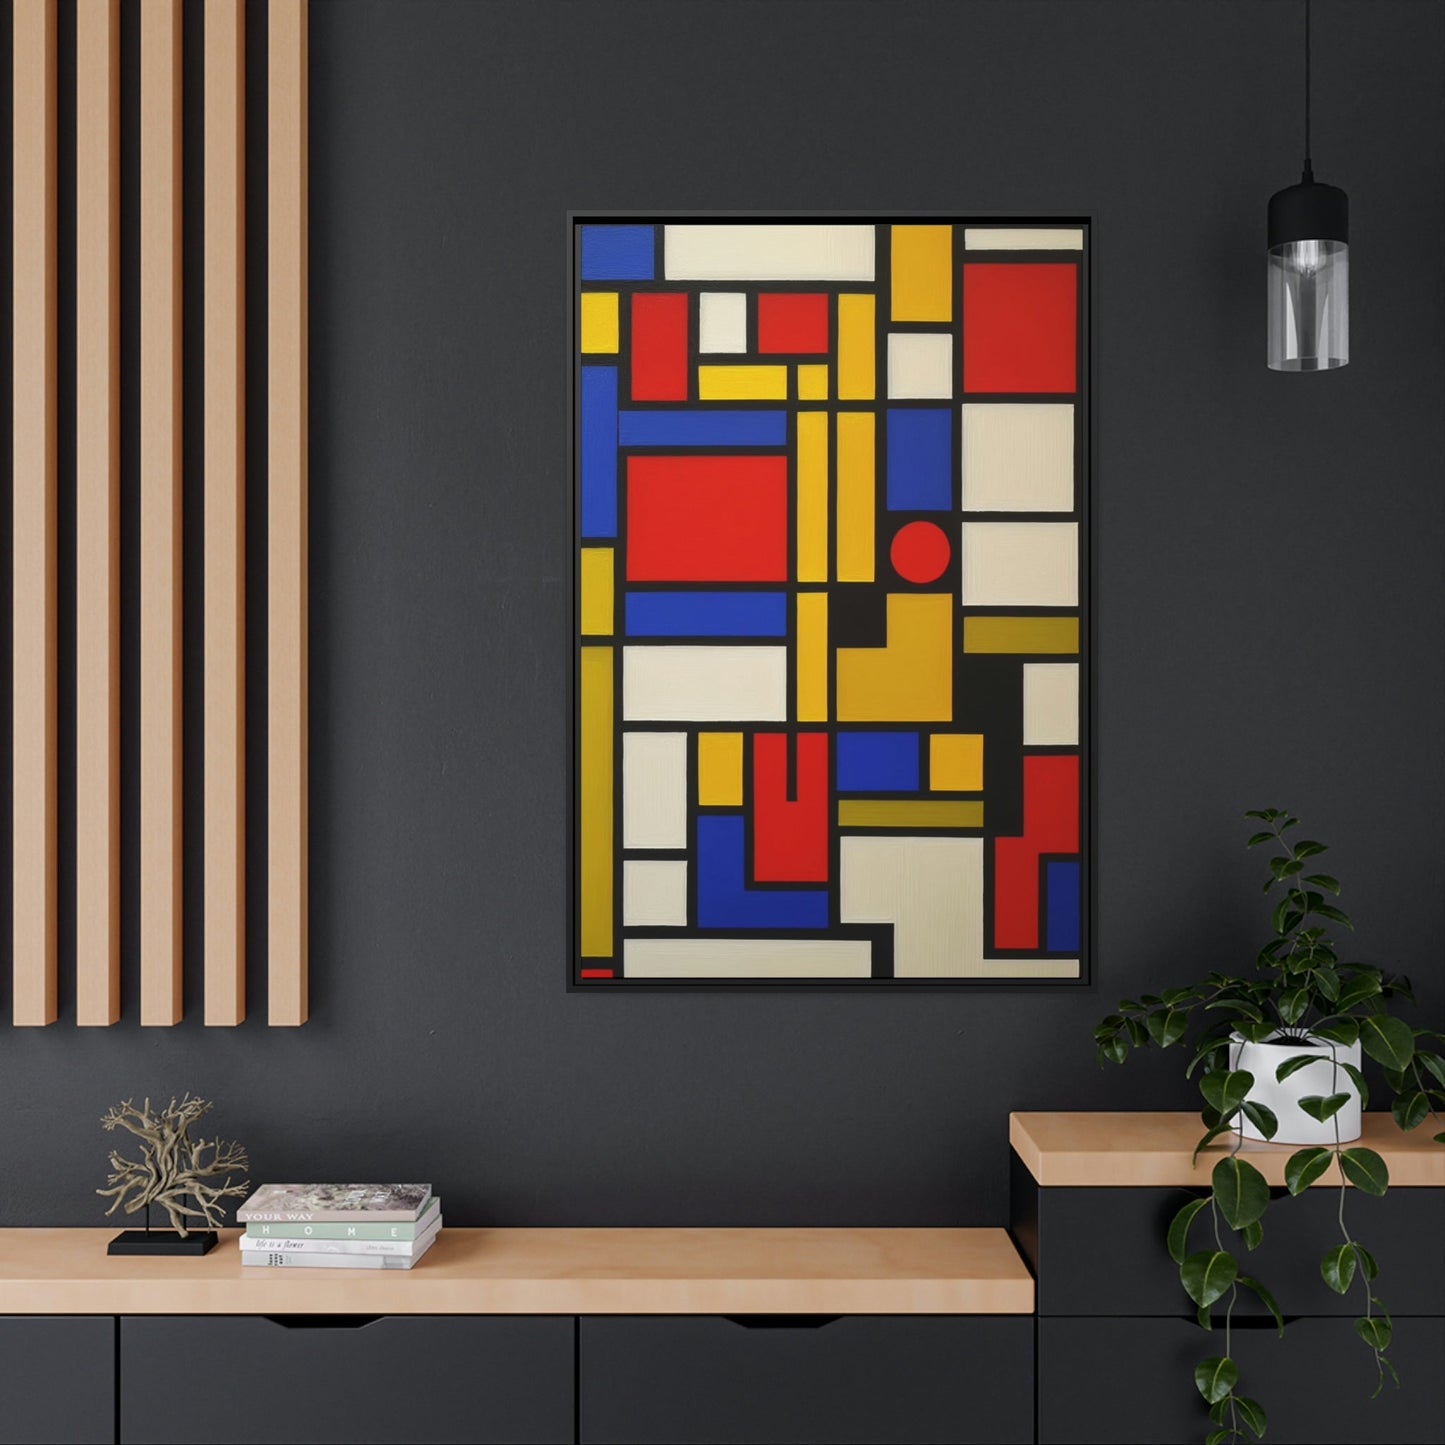 Natural Canvas & Poster Print of Geometric Patterns: A Mosaic of Shapes